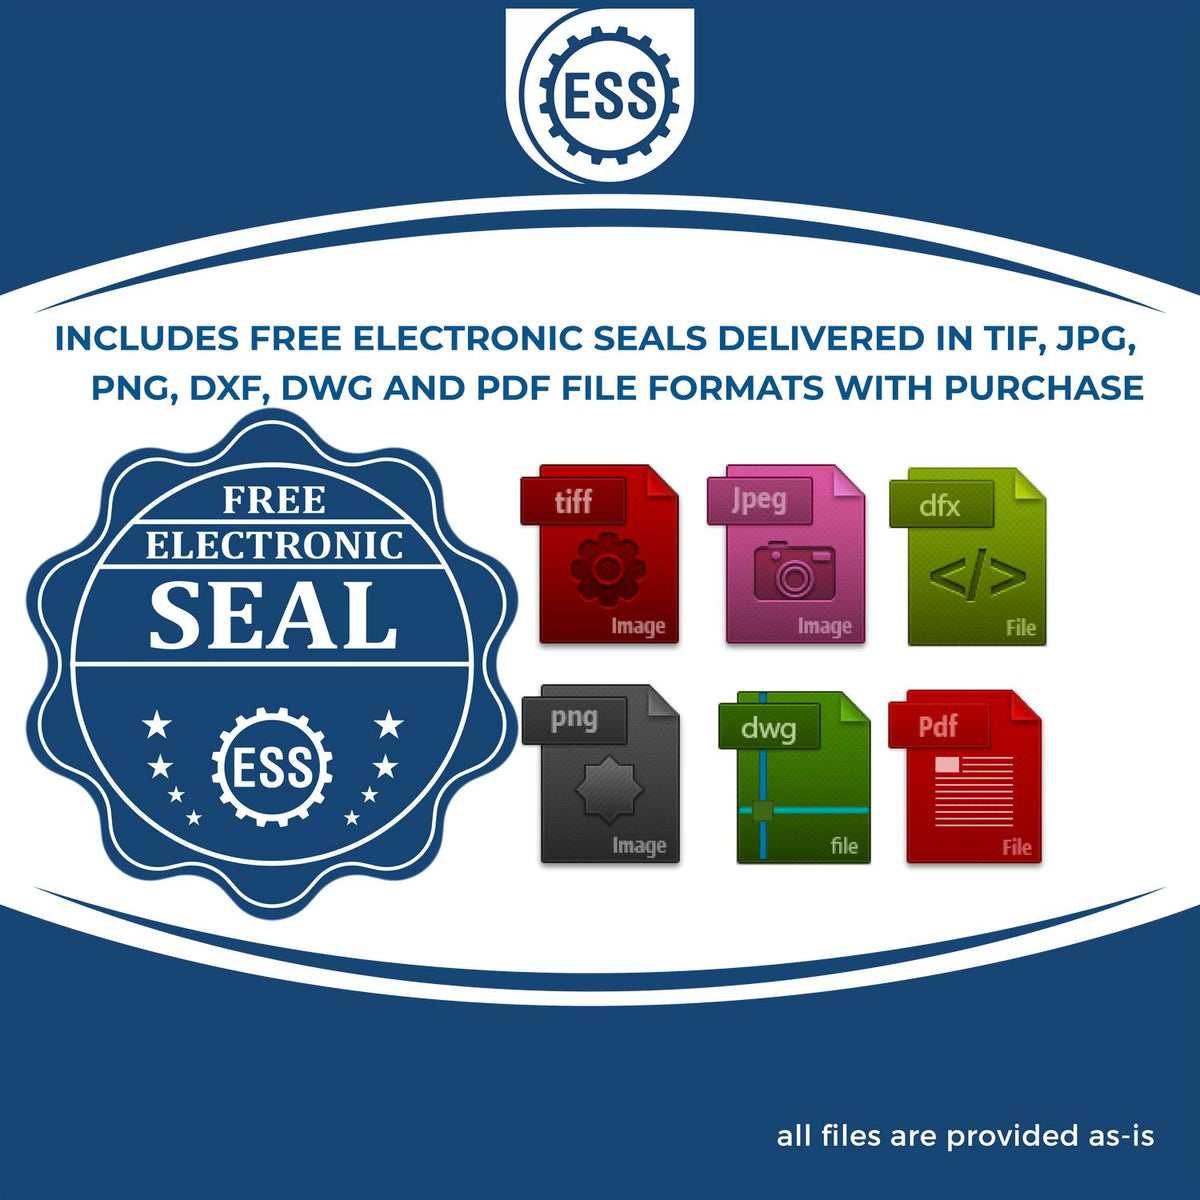 An infographic for the free electronic seal for the State of Virginia Architectural Seal Embosser illustrating the different file type icons such as DXF, DWG, TIF, JPG and PNG.